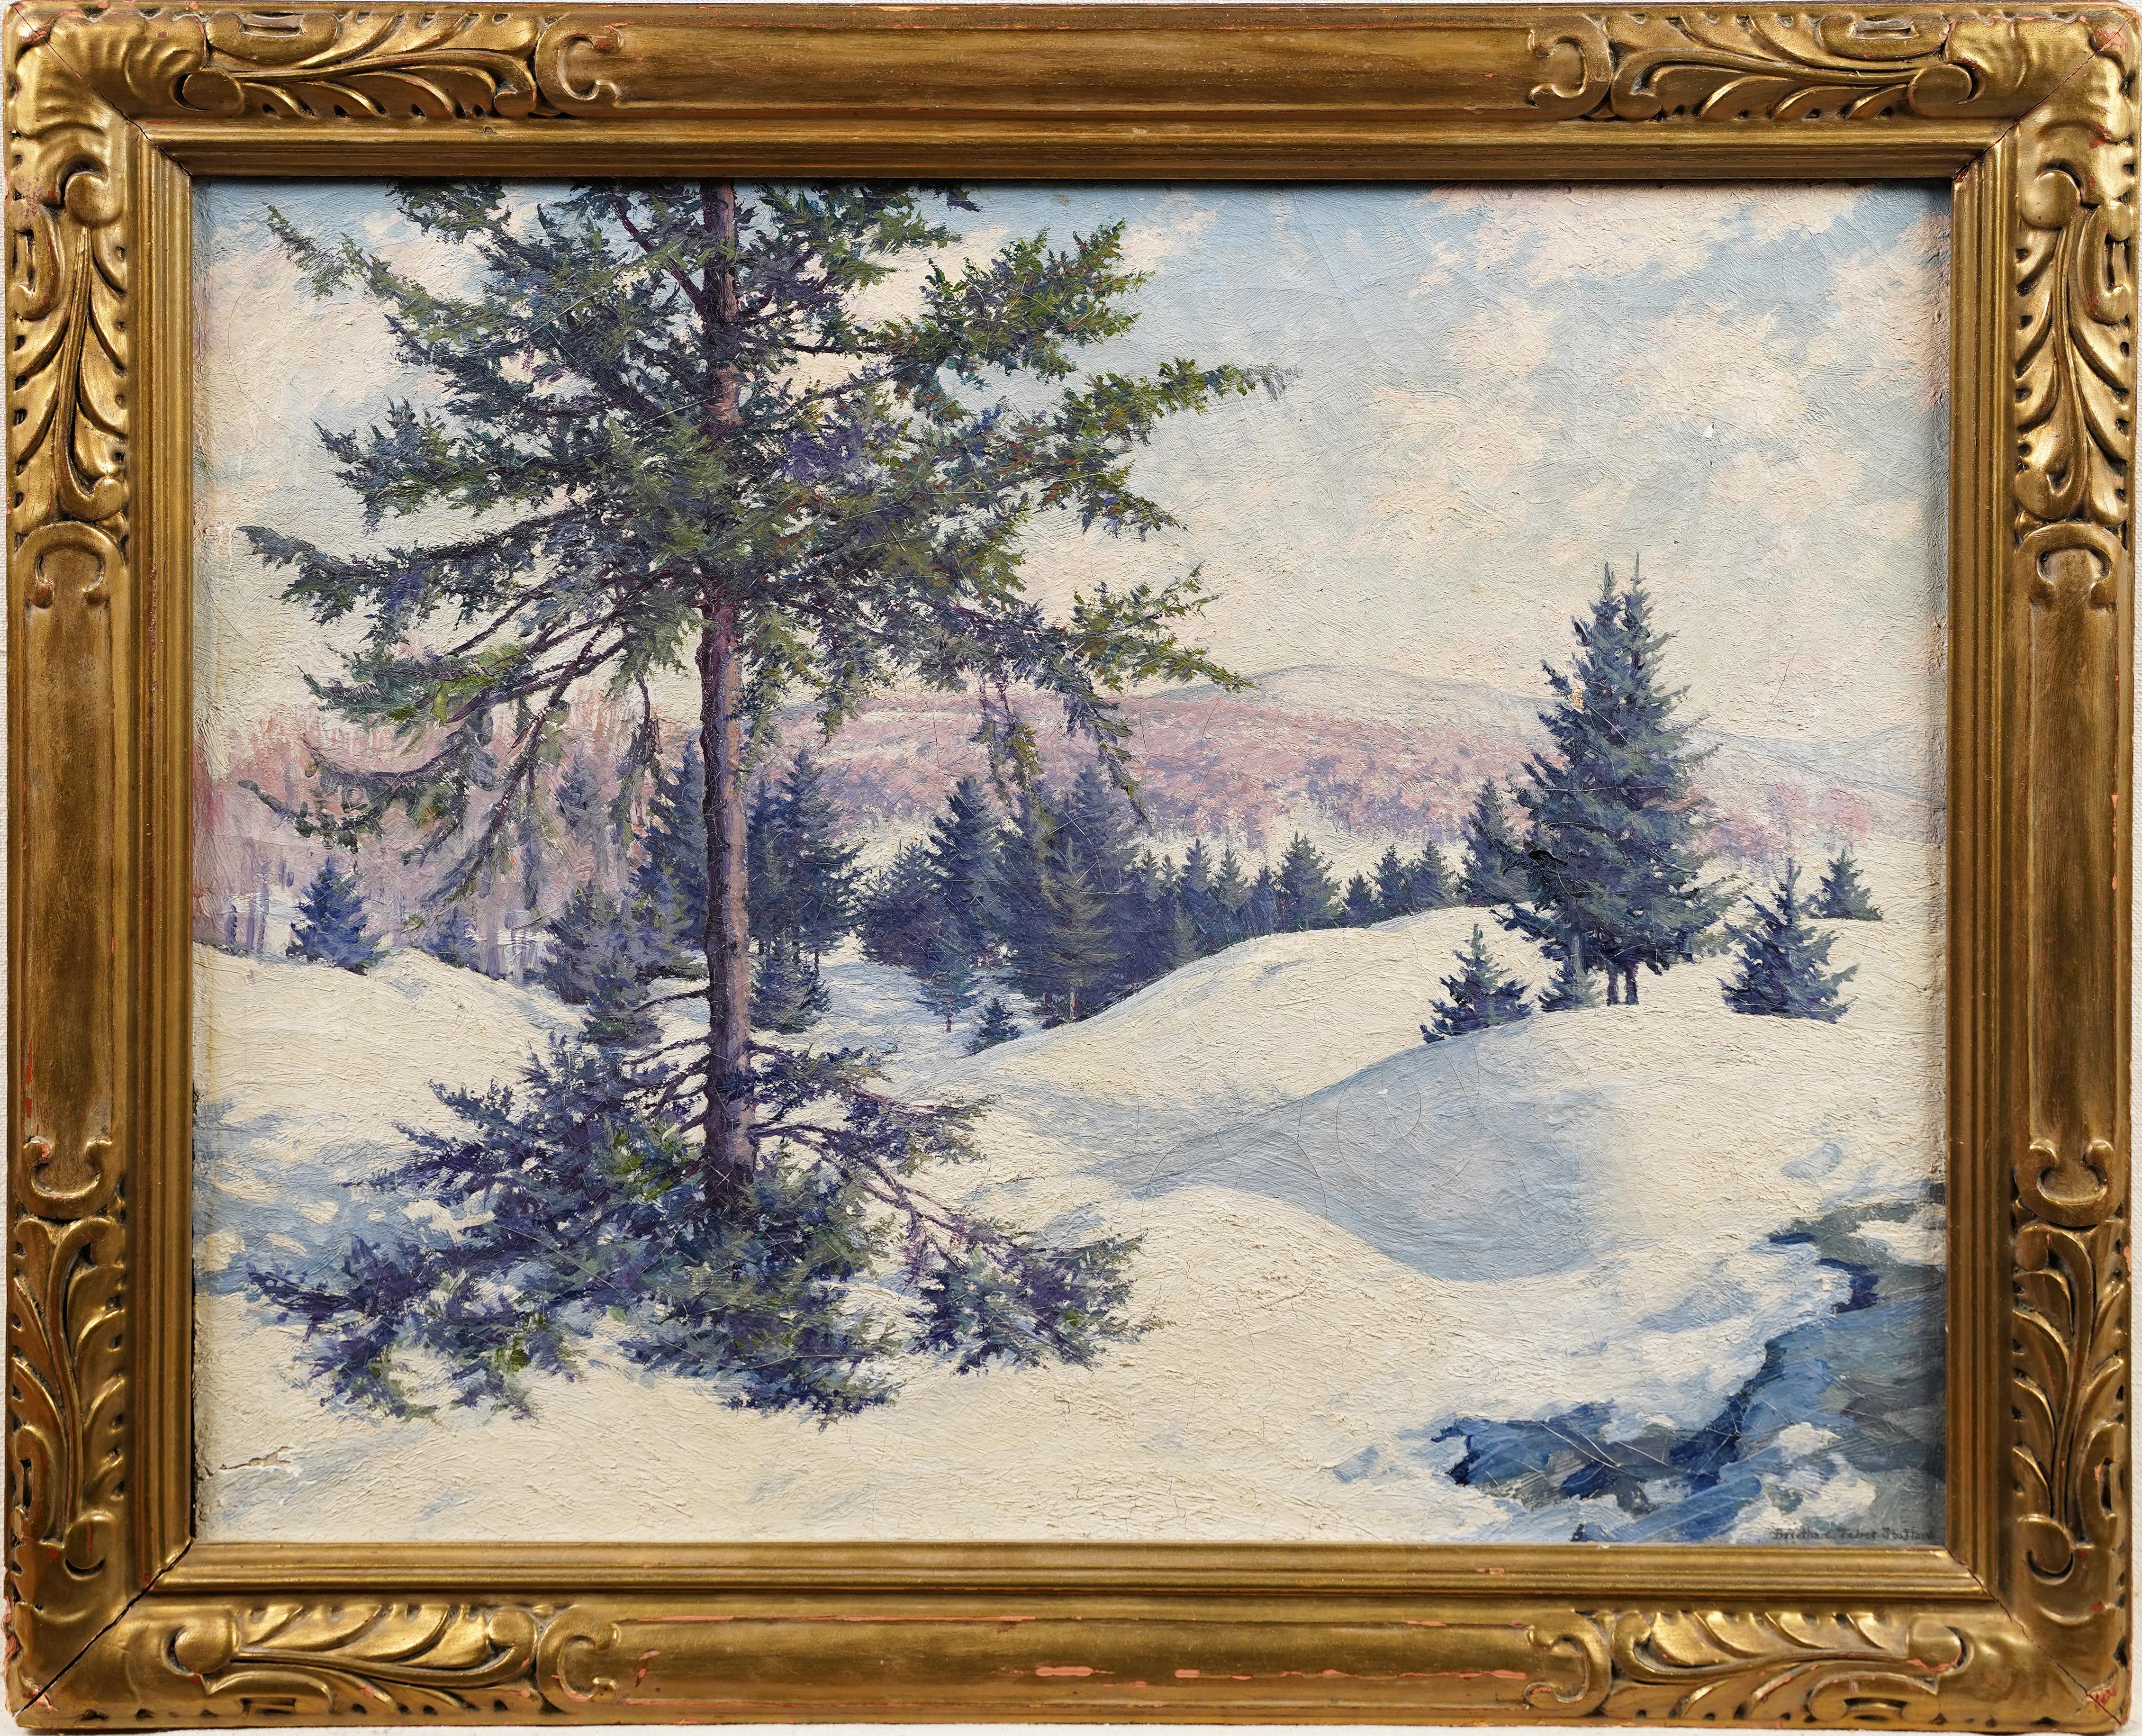 dorothea stafford Landscape Painting - Early American Impressionist Winter Vermont Landscape Framed Signed Oil Painting